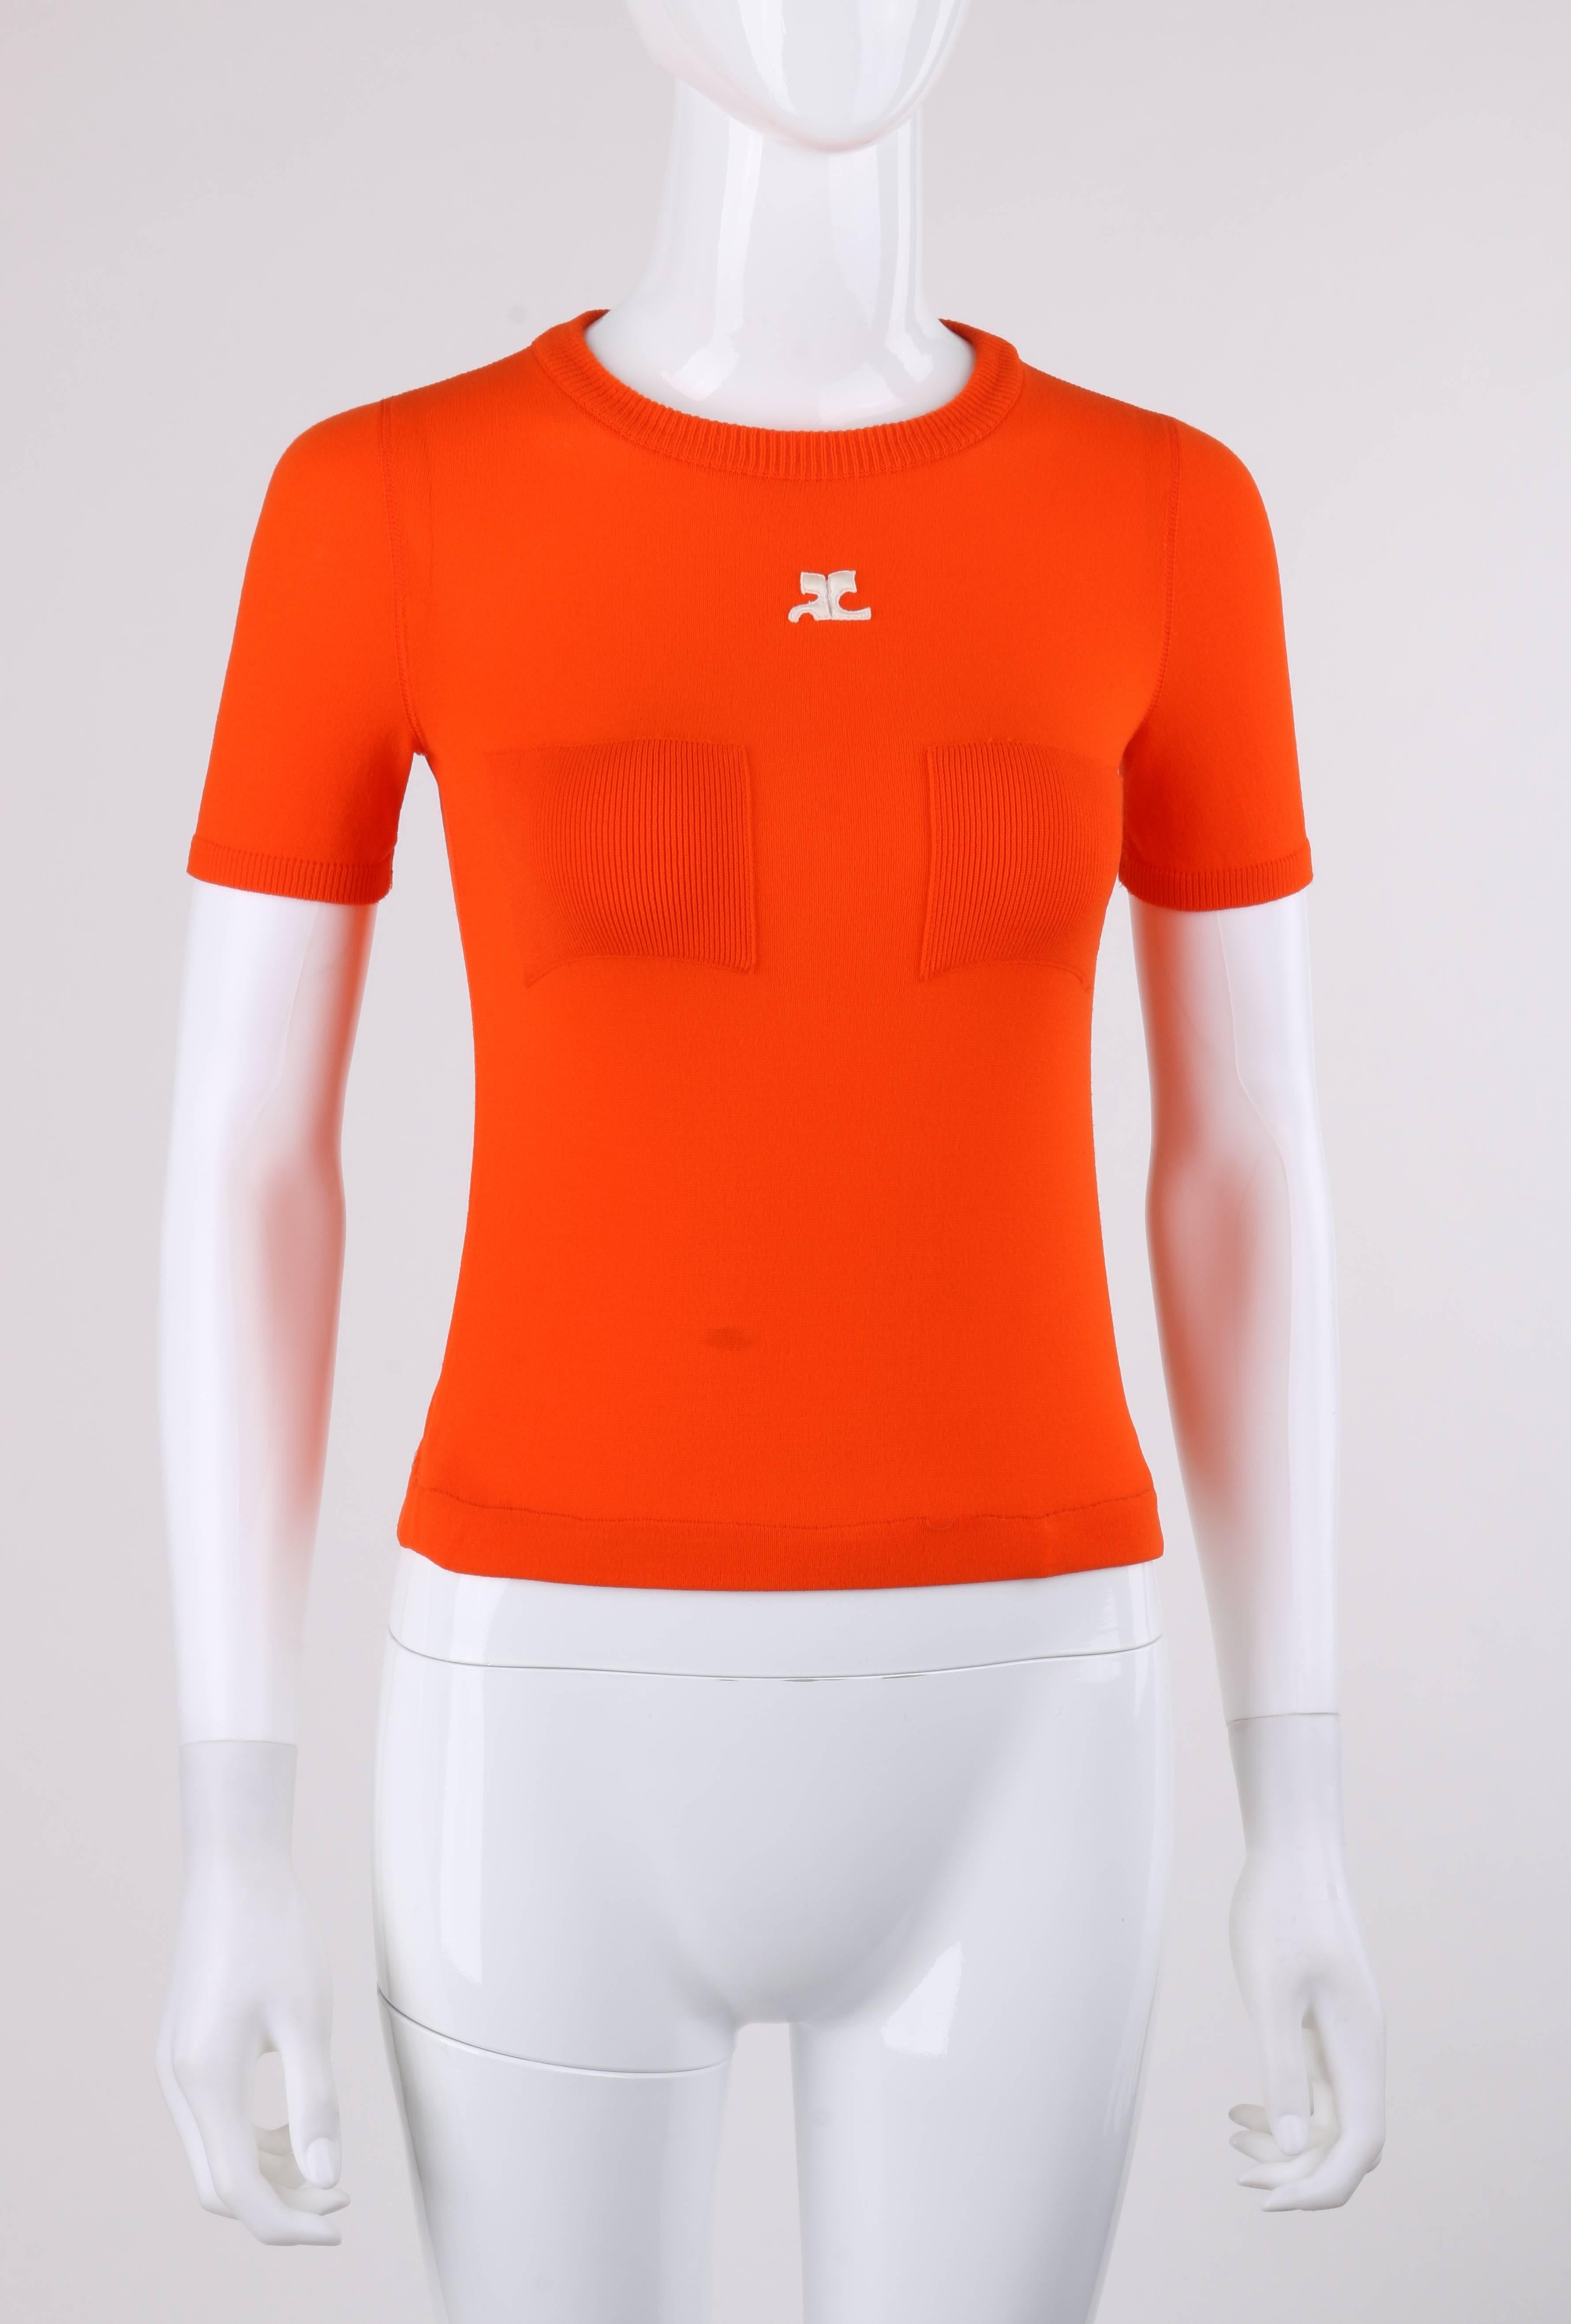 Vintage Courreges c.1970's orange knit short sleeve crewneck top. Designed by Andre Courreges. Rib knit crew neckline Short sleeves with rib knit detail at cuffs. Two front square knit patches. Center front white 